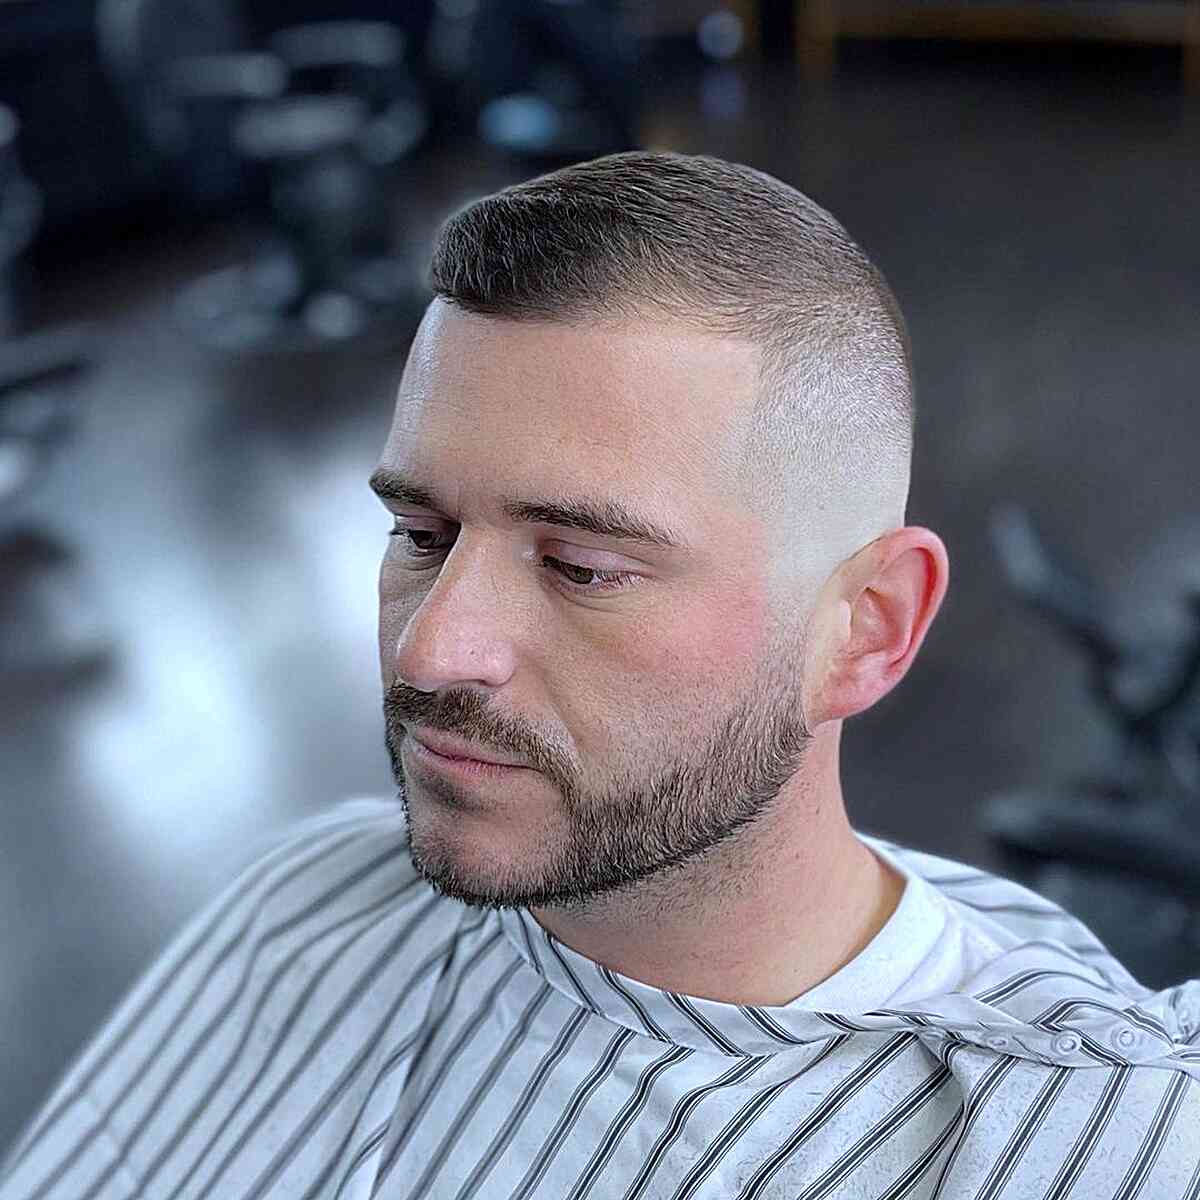 41 Types of Short Fade Haircuts + Trendy Ways Guys Can Get It